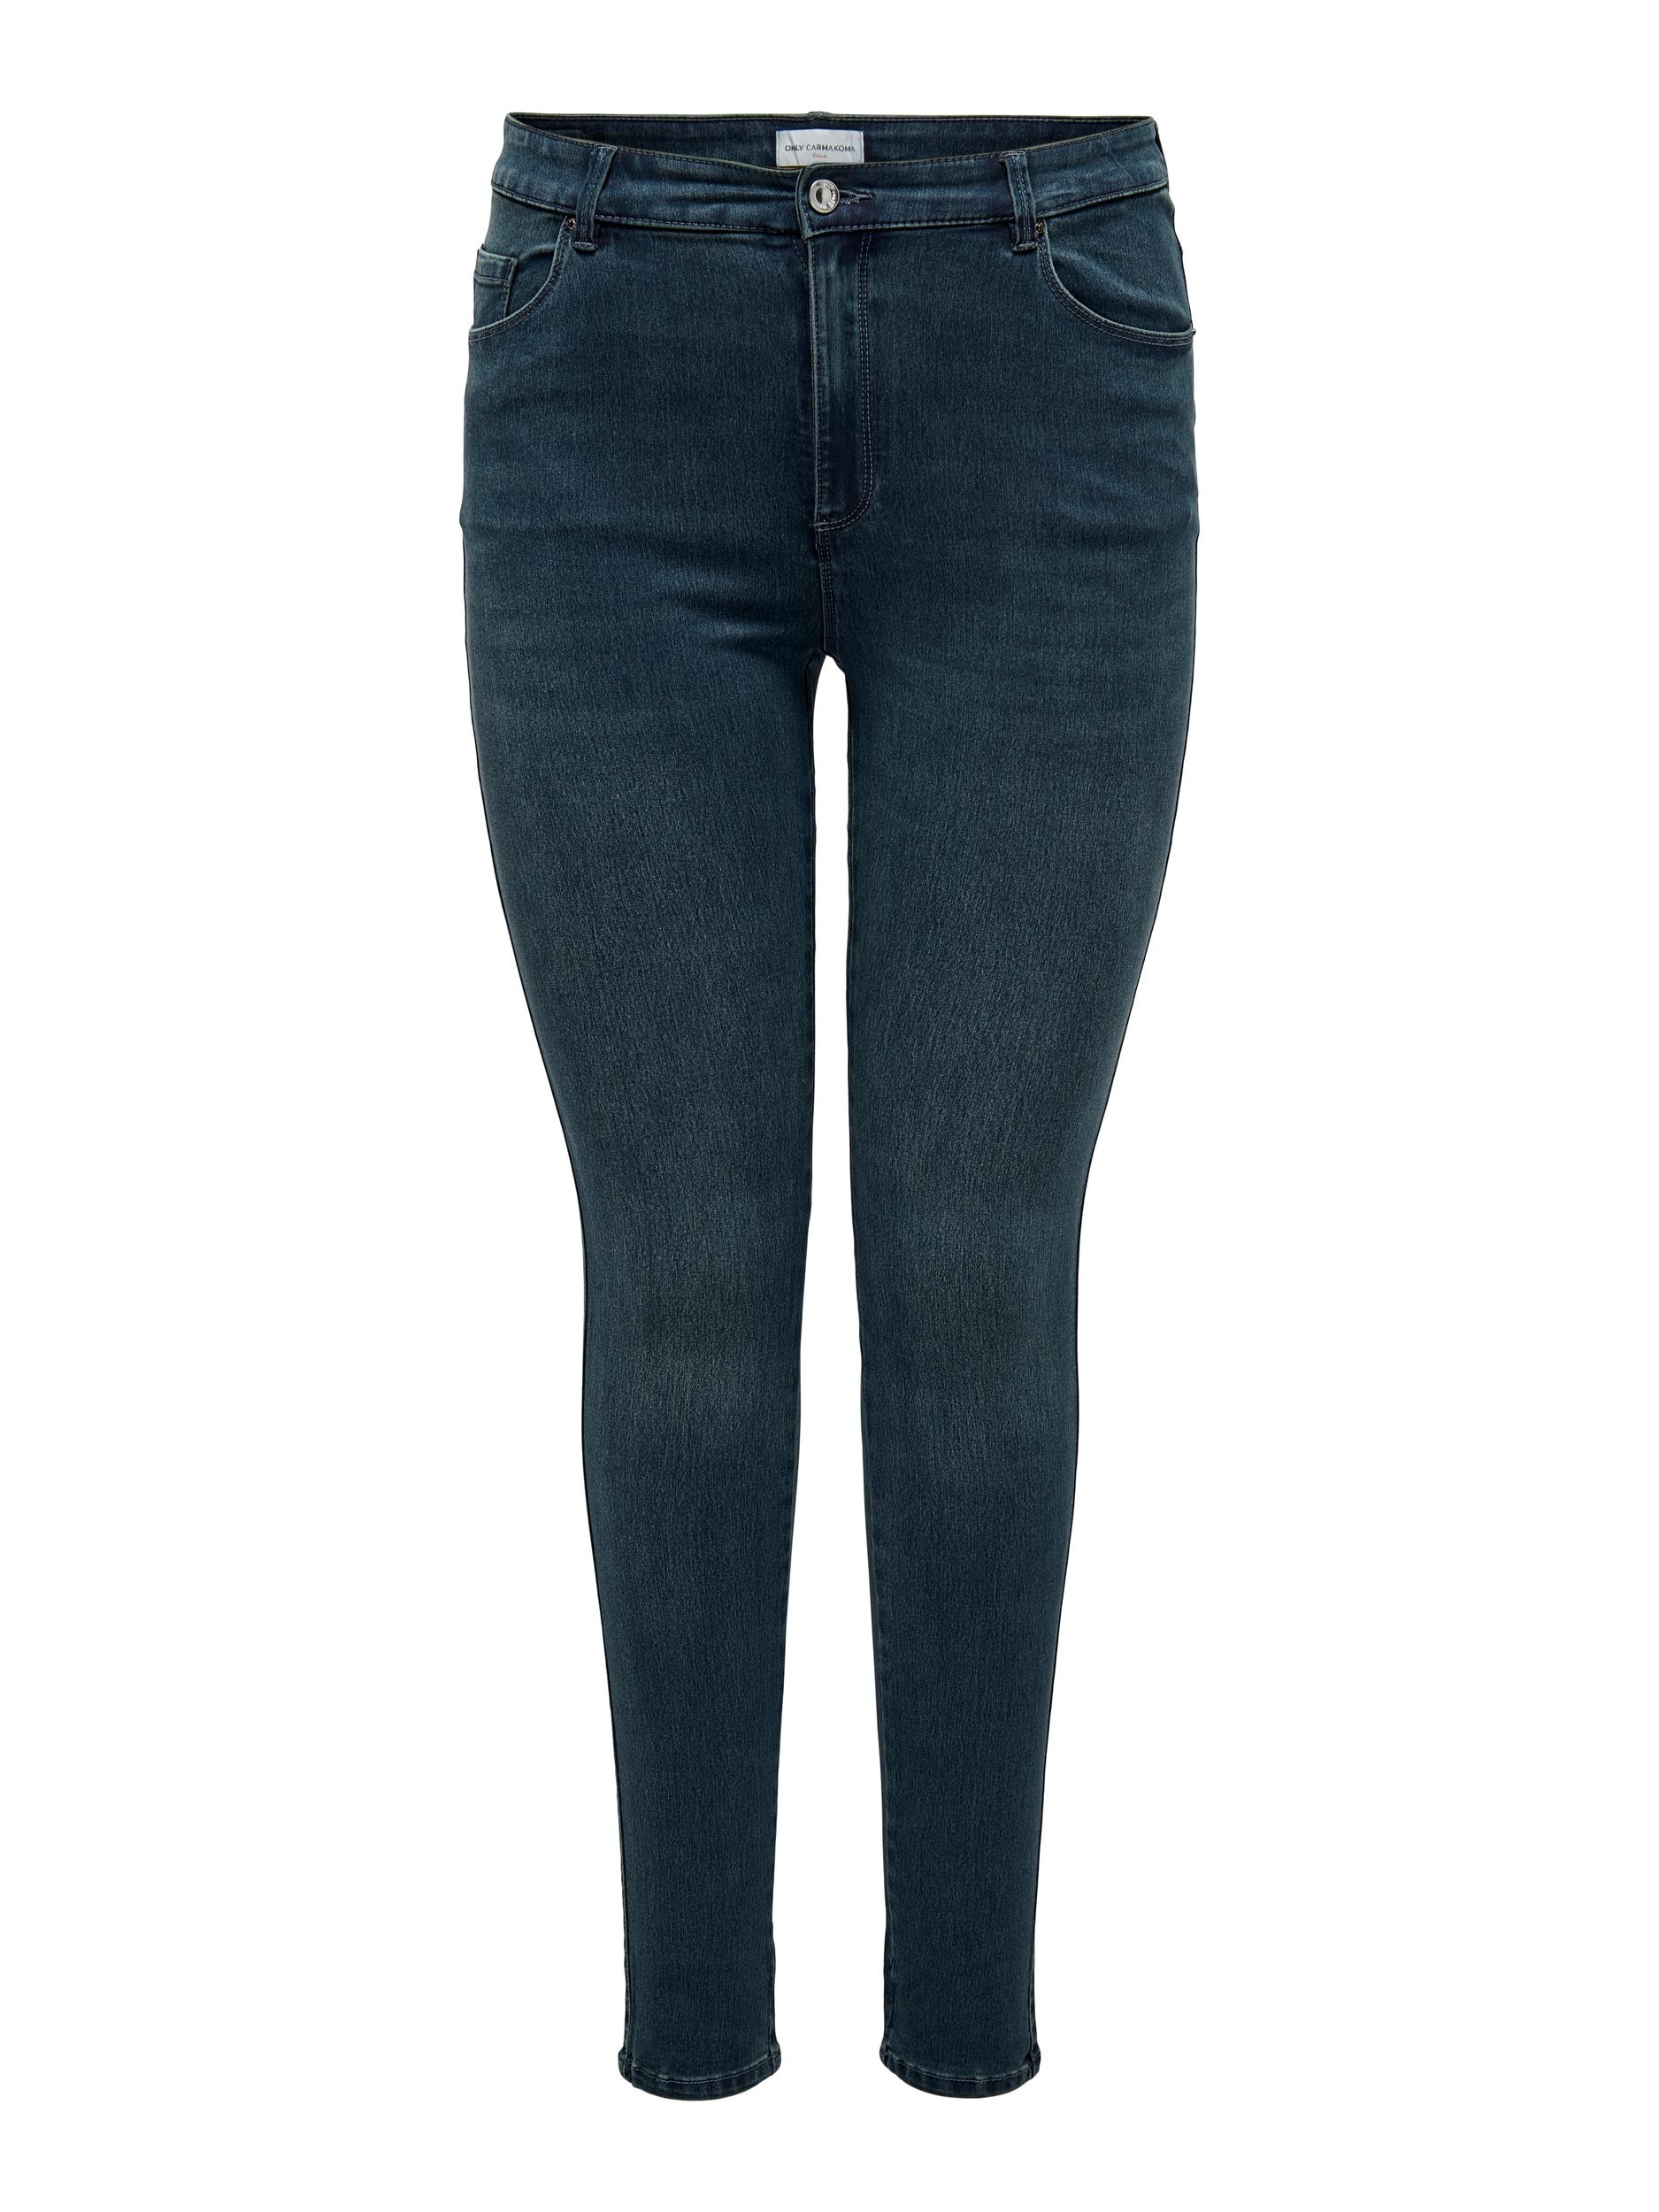 CARMAKOMA DNM SKINNY NOOS« Skinny-fit-Jeans bei BJ558 HW OTTO ONLY »CARAUGUSTA